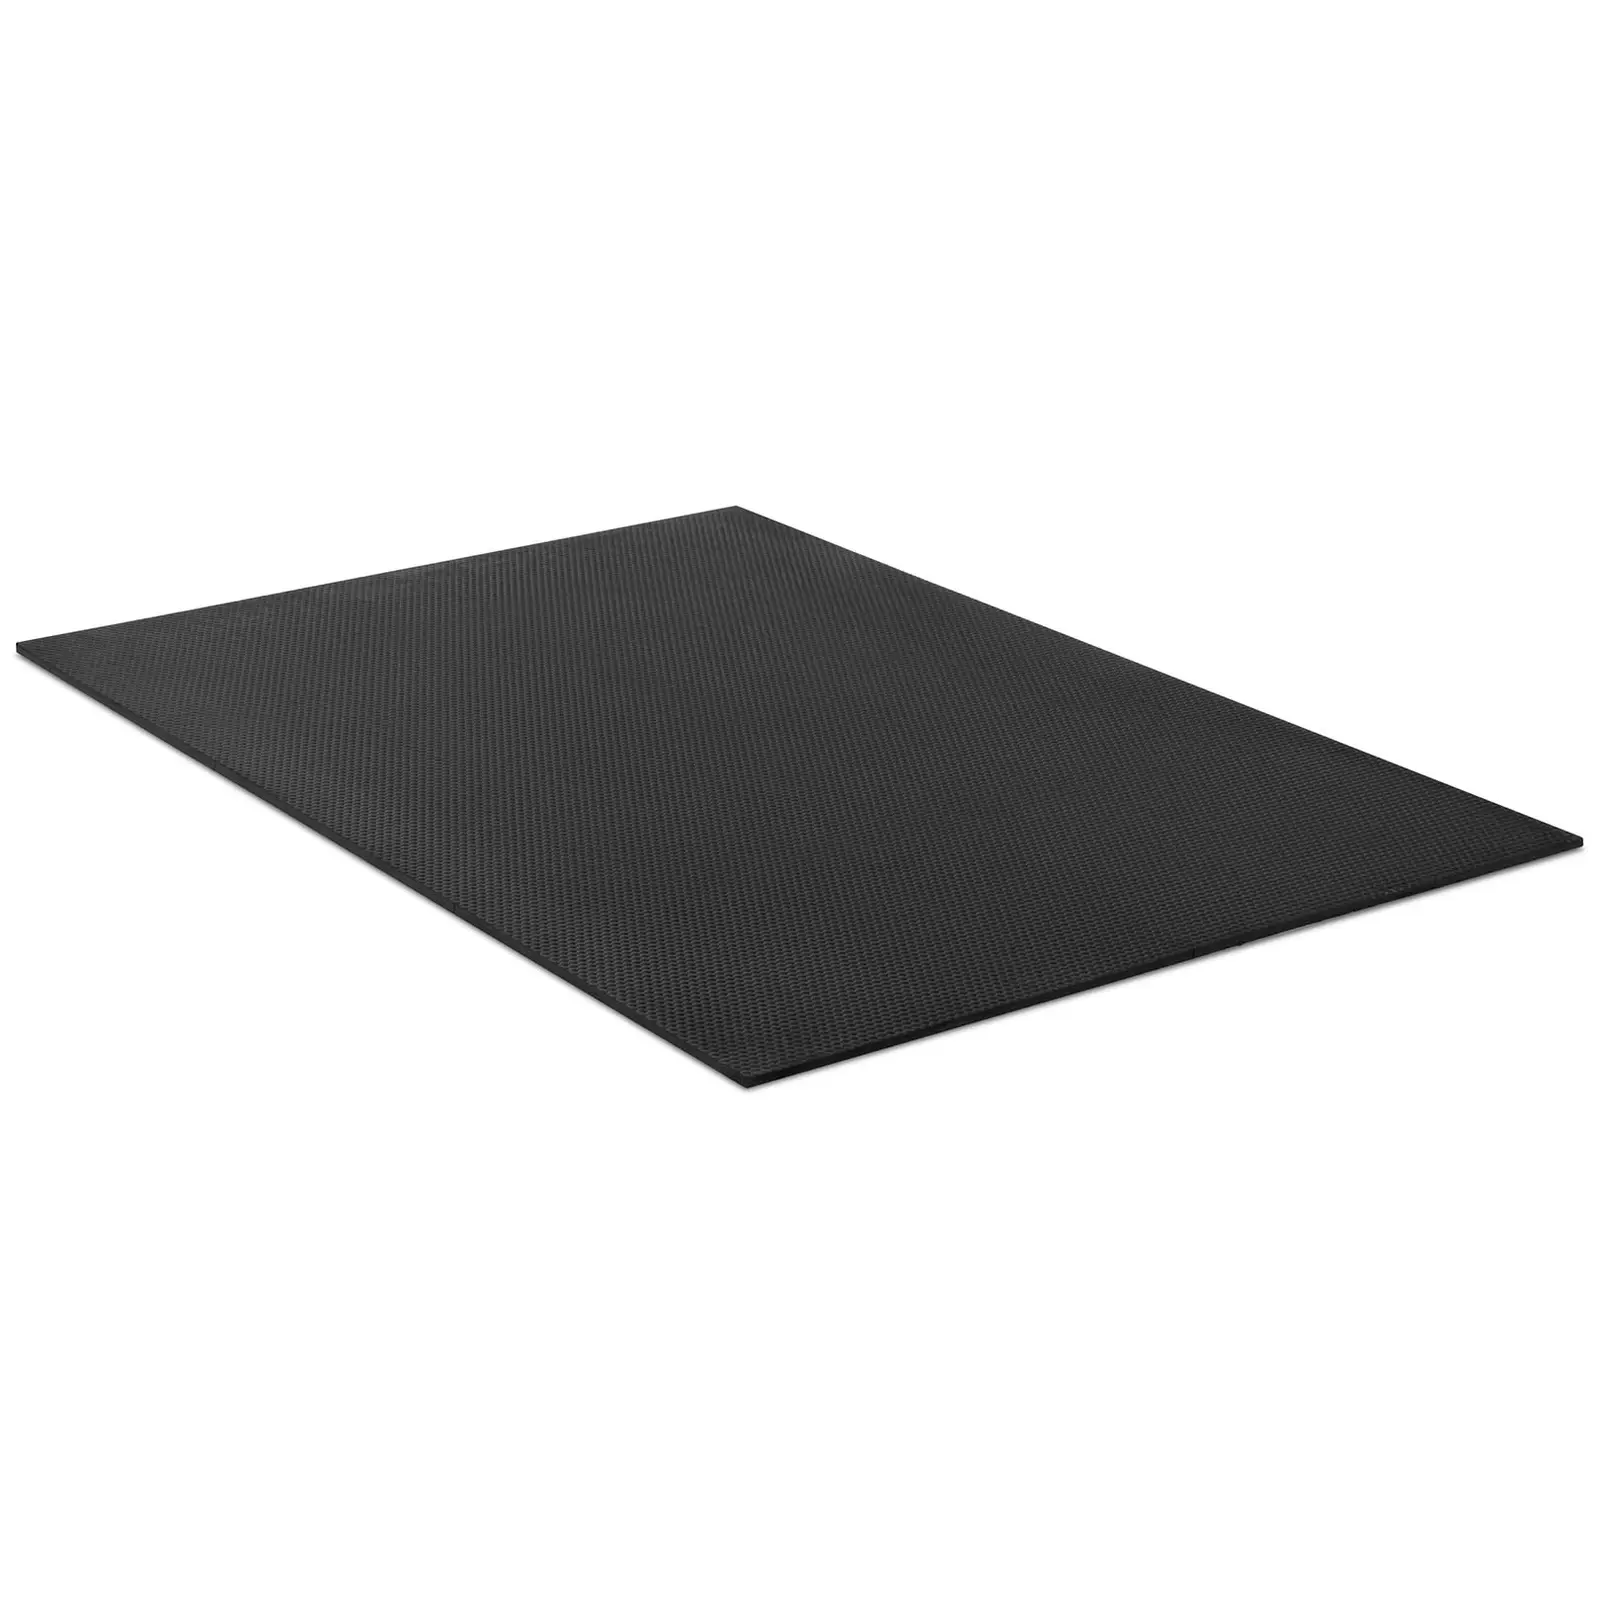 Stalmat - met drainagenoppen - 1830x1220 x 17 mm - NR, gerecycled rubber